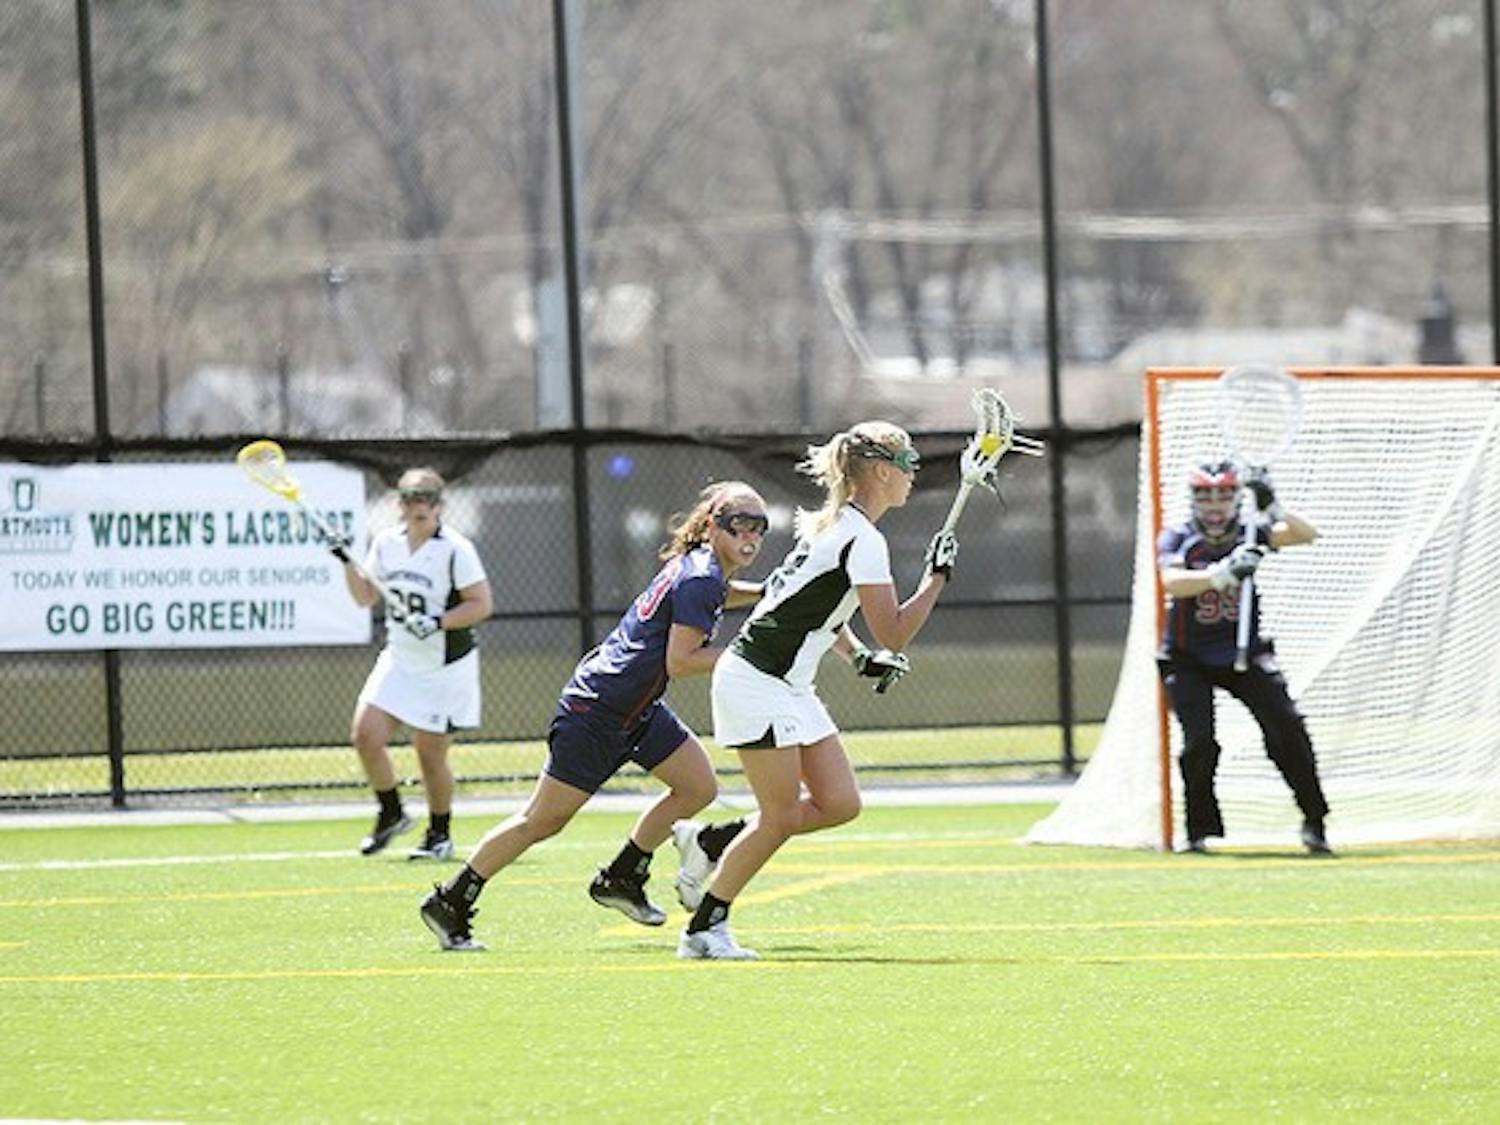 The women's lacrosse team will look to avenge a 22-4 loss to Syracuse University when the teams meet on Sunday in the NCAA Tournament.